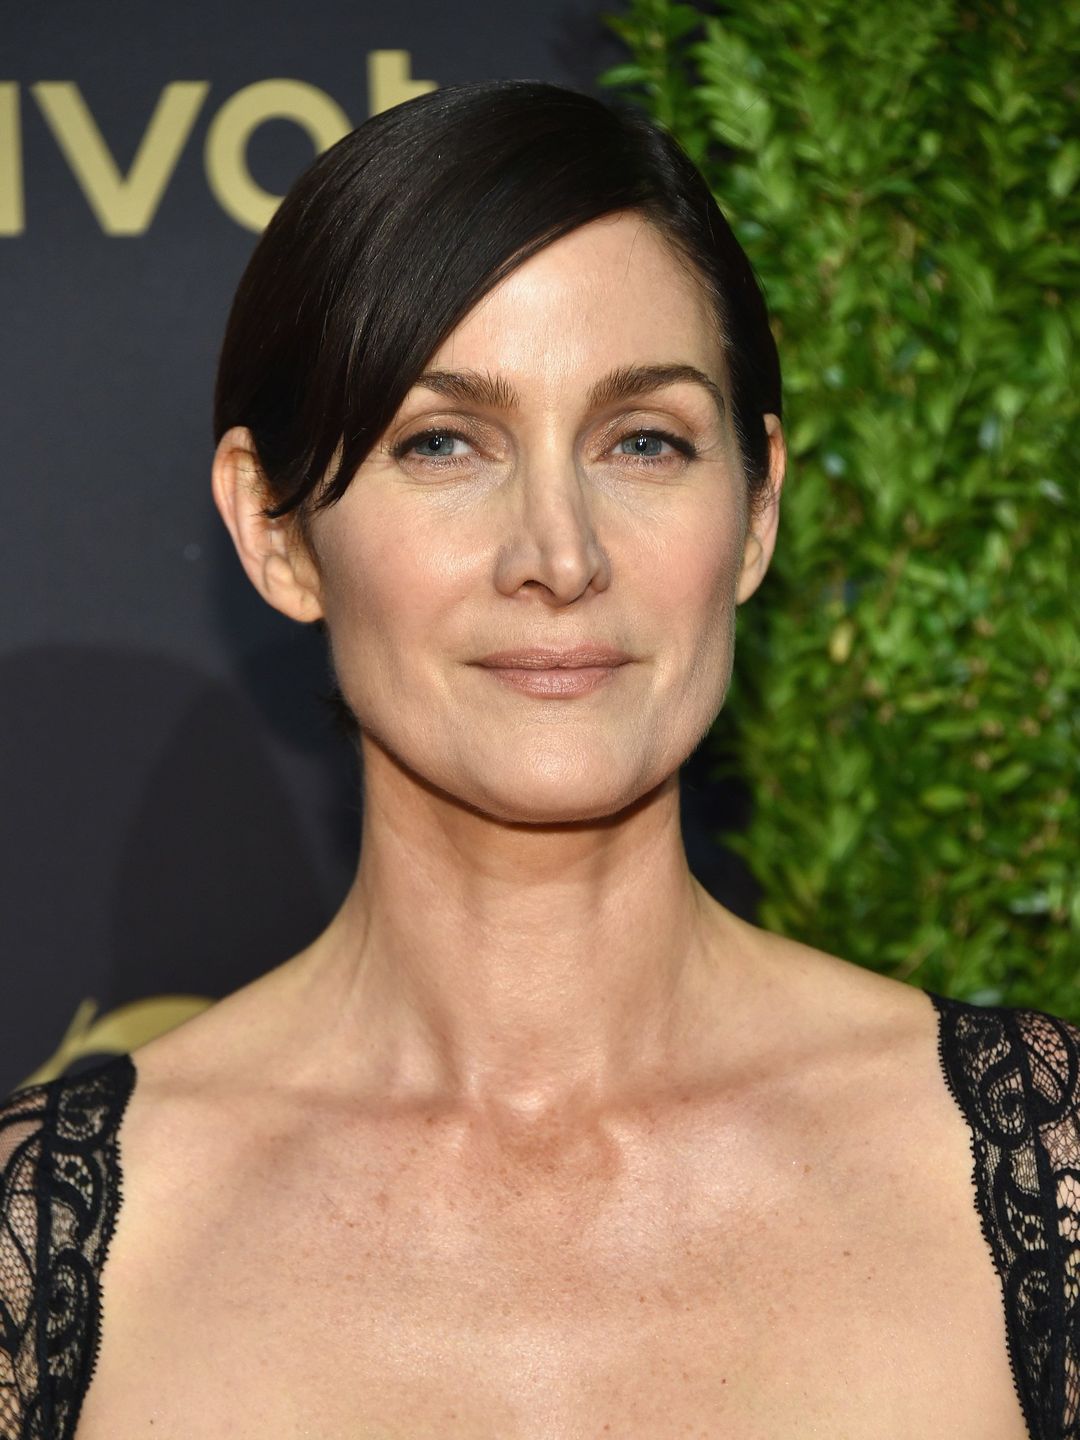 Carrie-Anne Moss unphotoshopped pictures